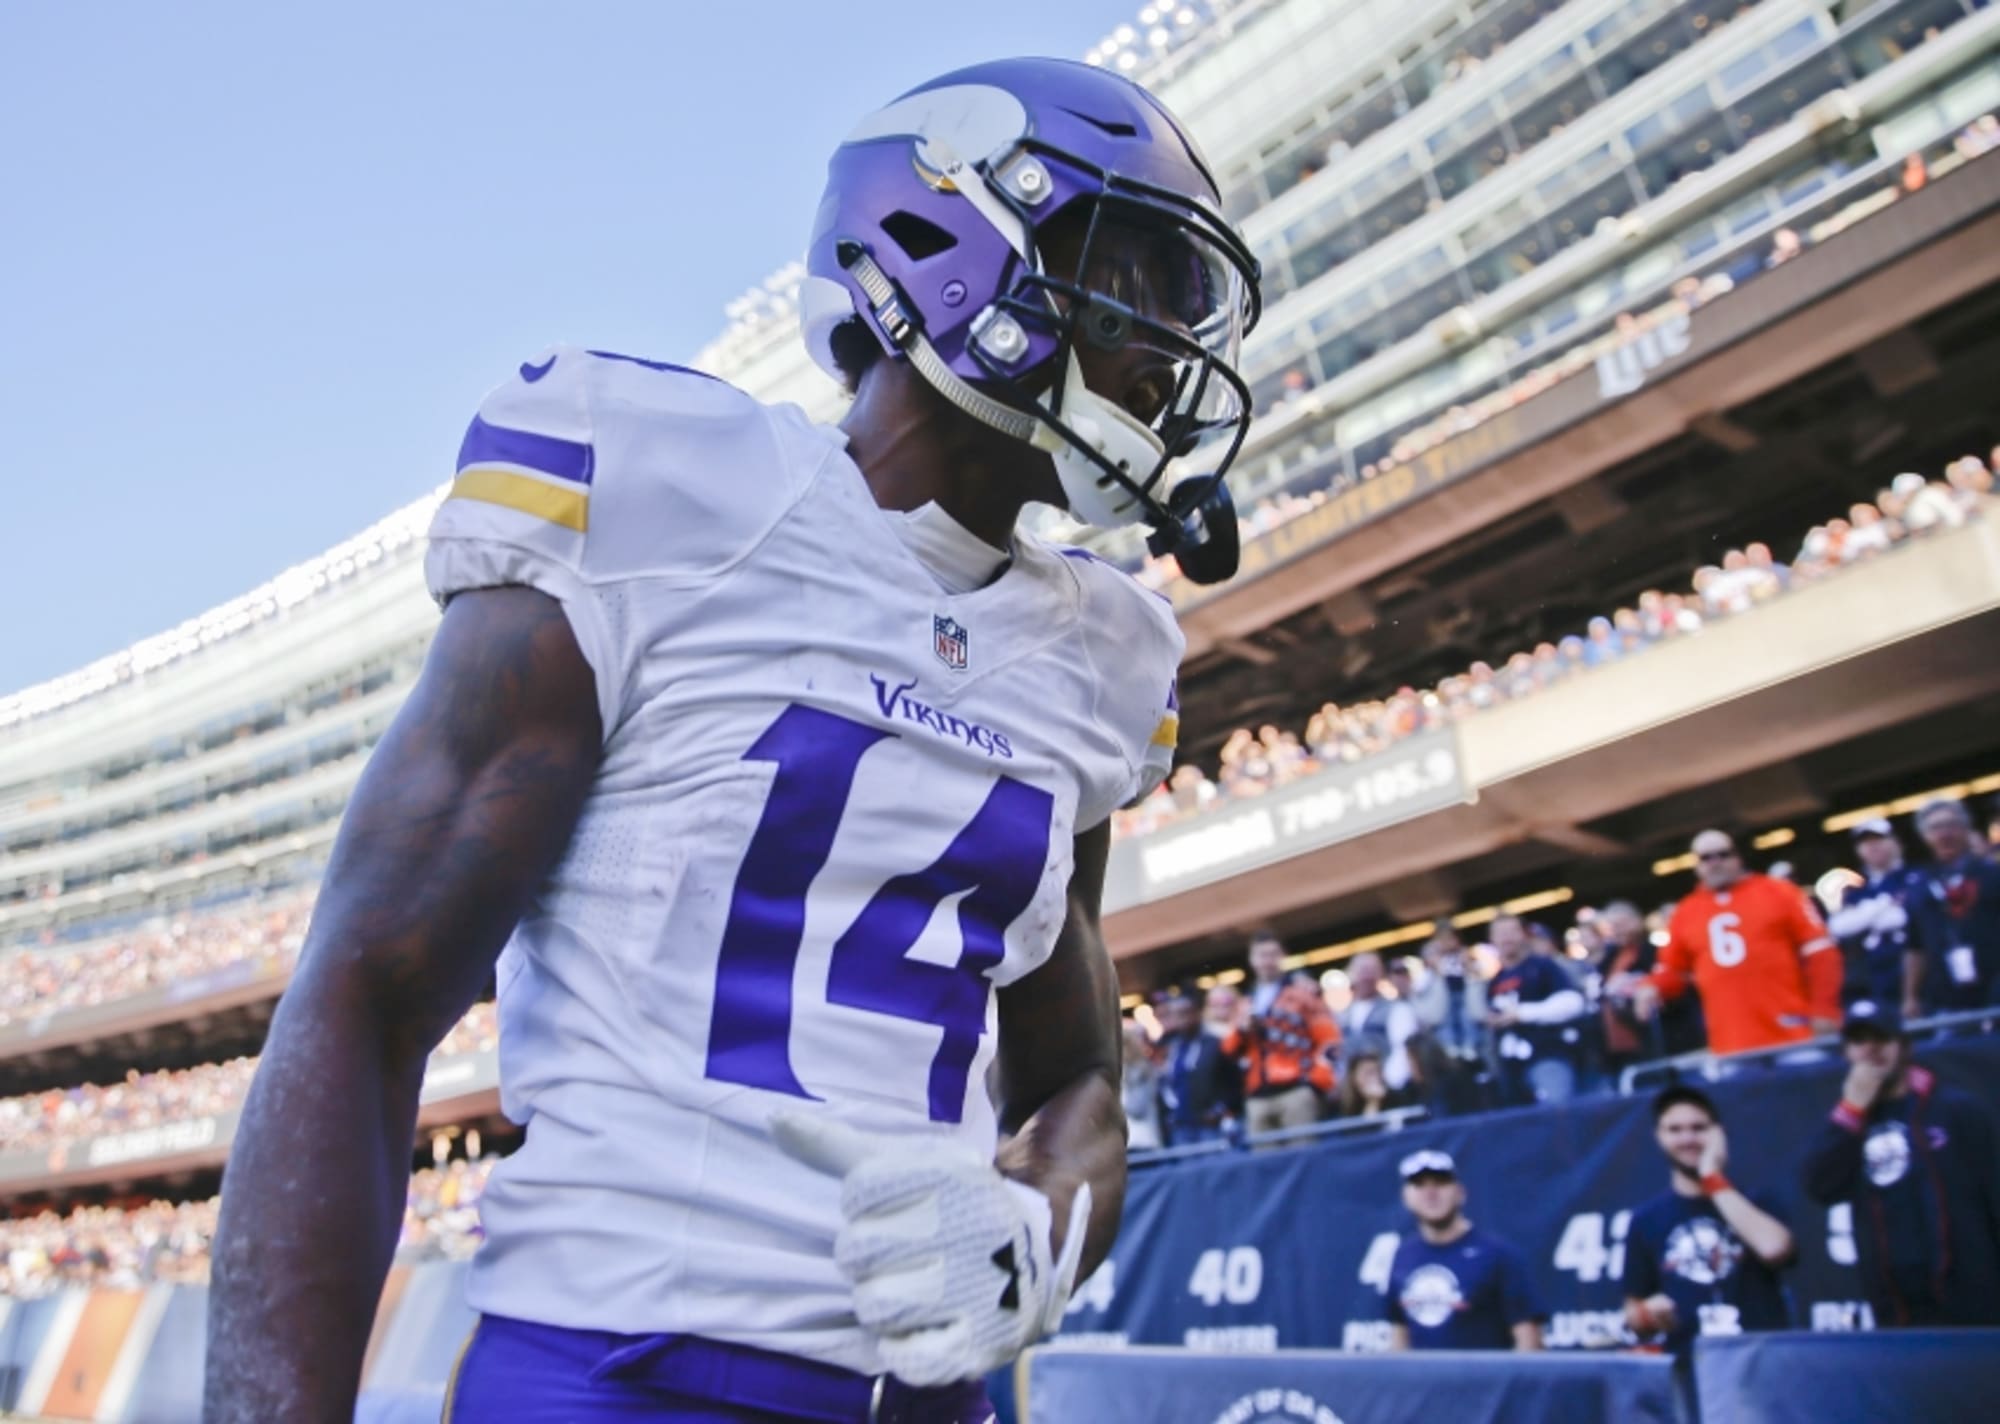 Minnesota Vikings: Diggs, Treadwell Can Become Potent Duo